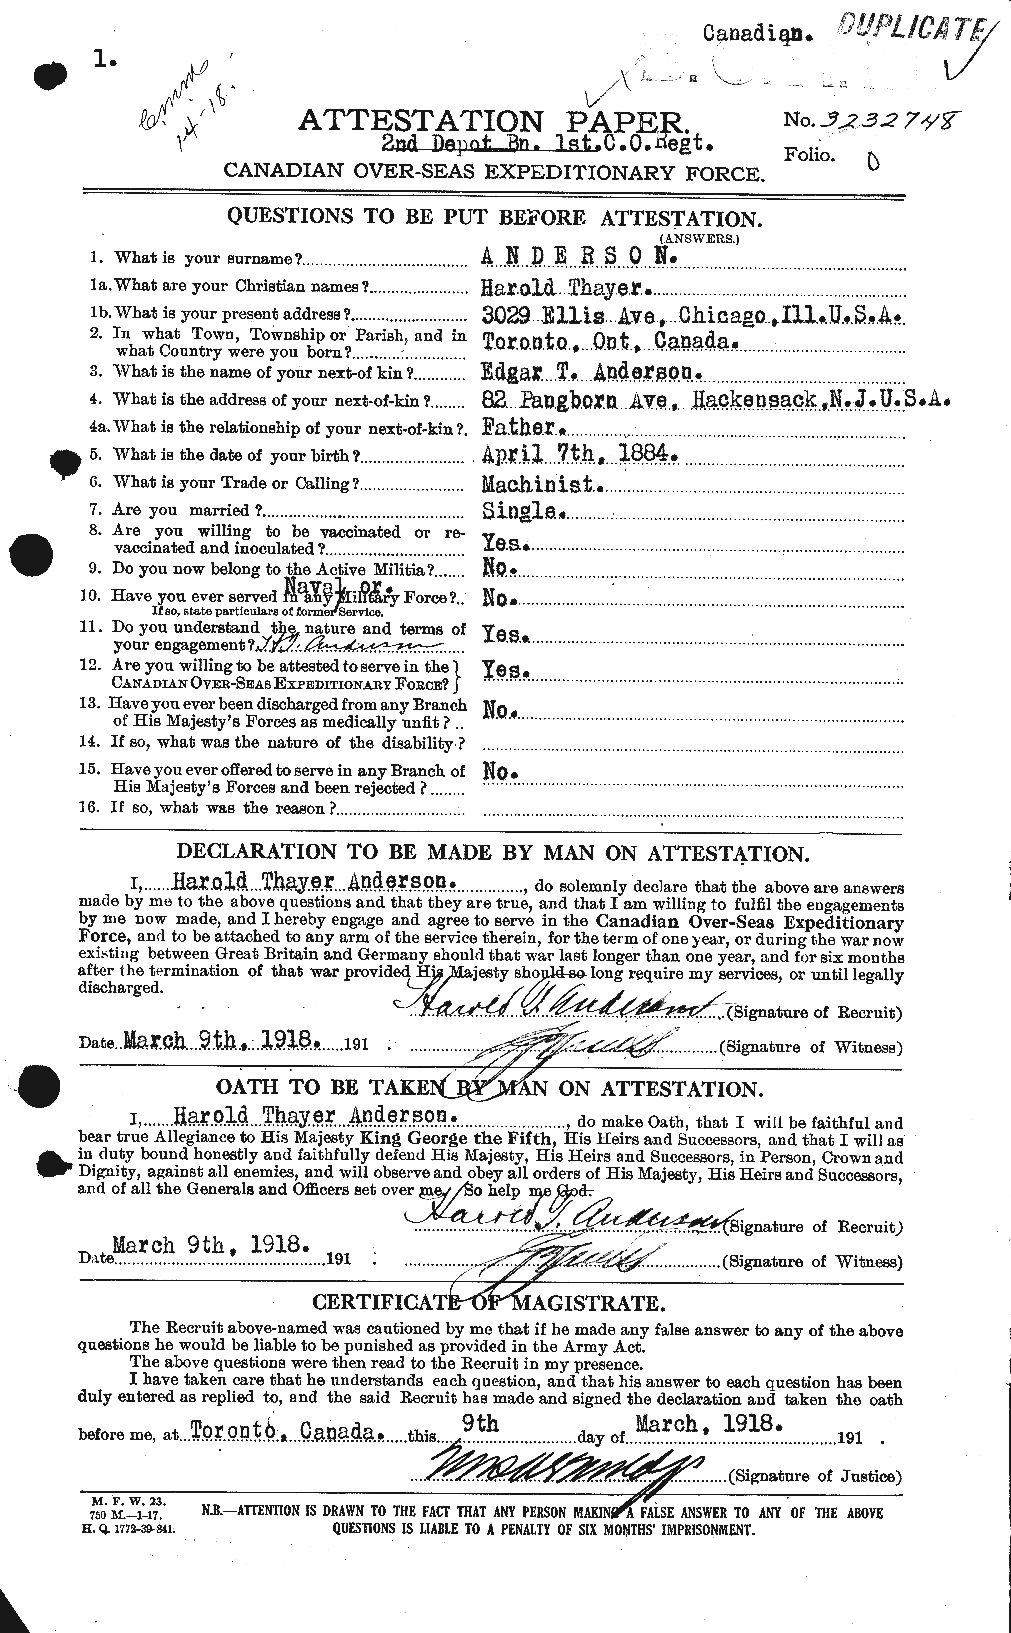 Personnel Records of the First World War - CEF 213285a